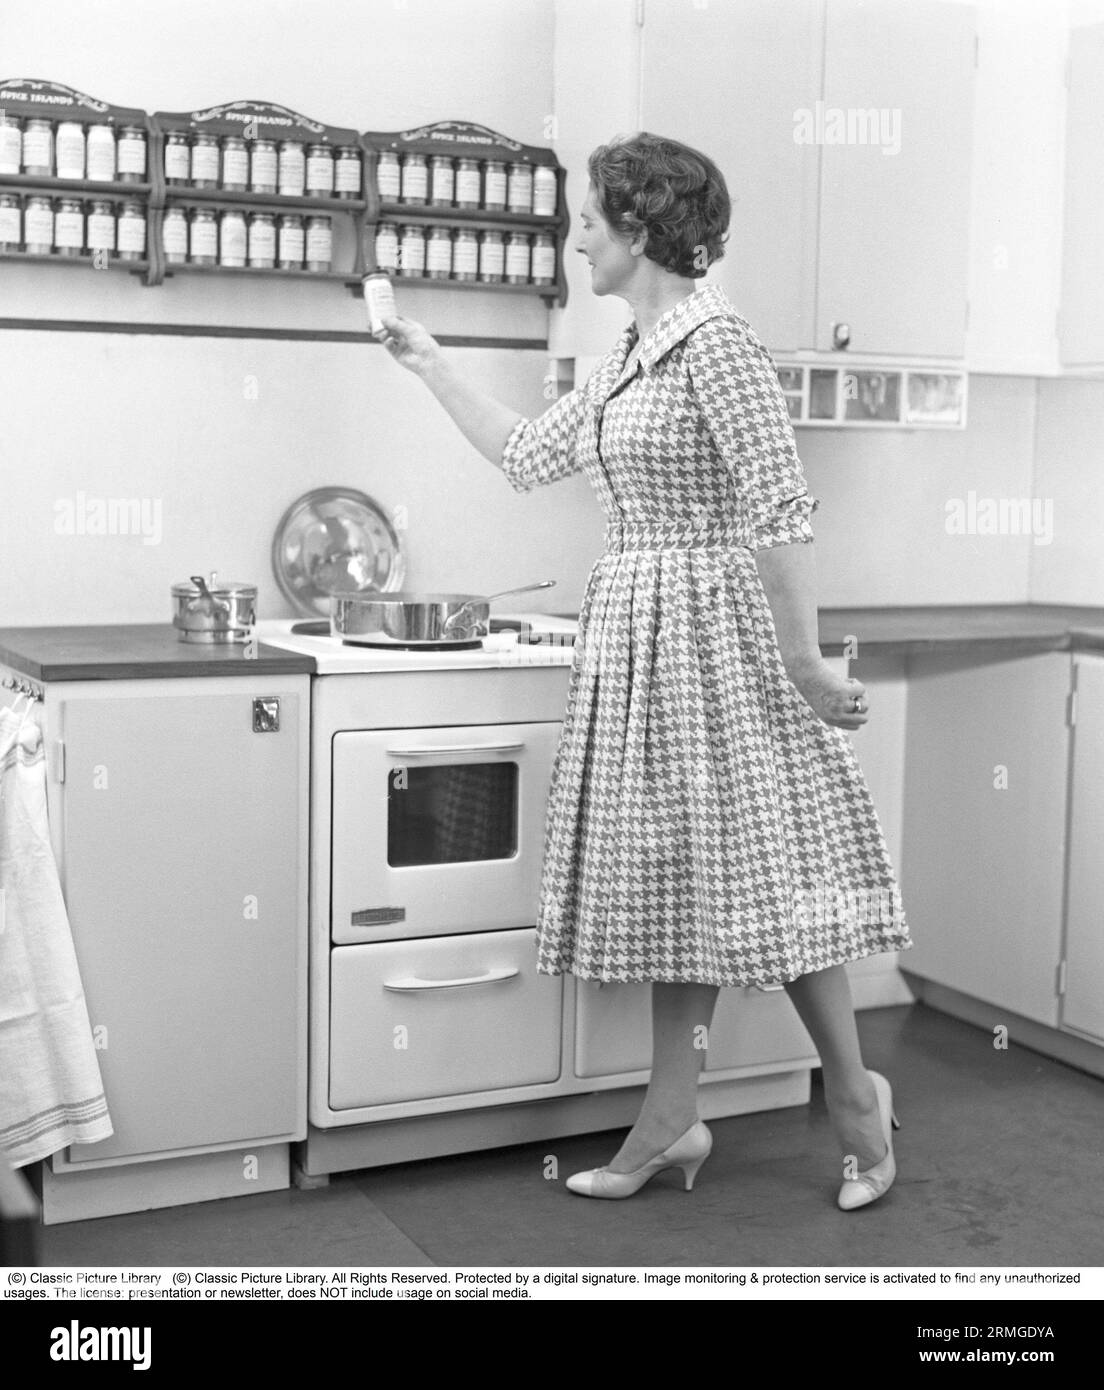 1950s WOMAN HOUSEWIFE IN KITCHEN APRON MIXING BAKING INGREDIENTS IN BOWL  Stock Photo - Alamy